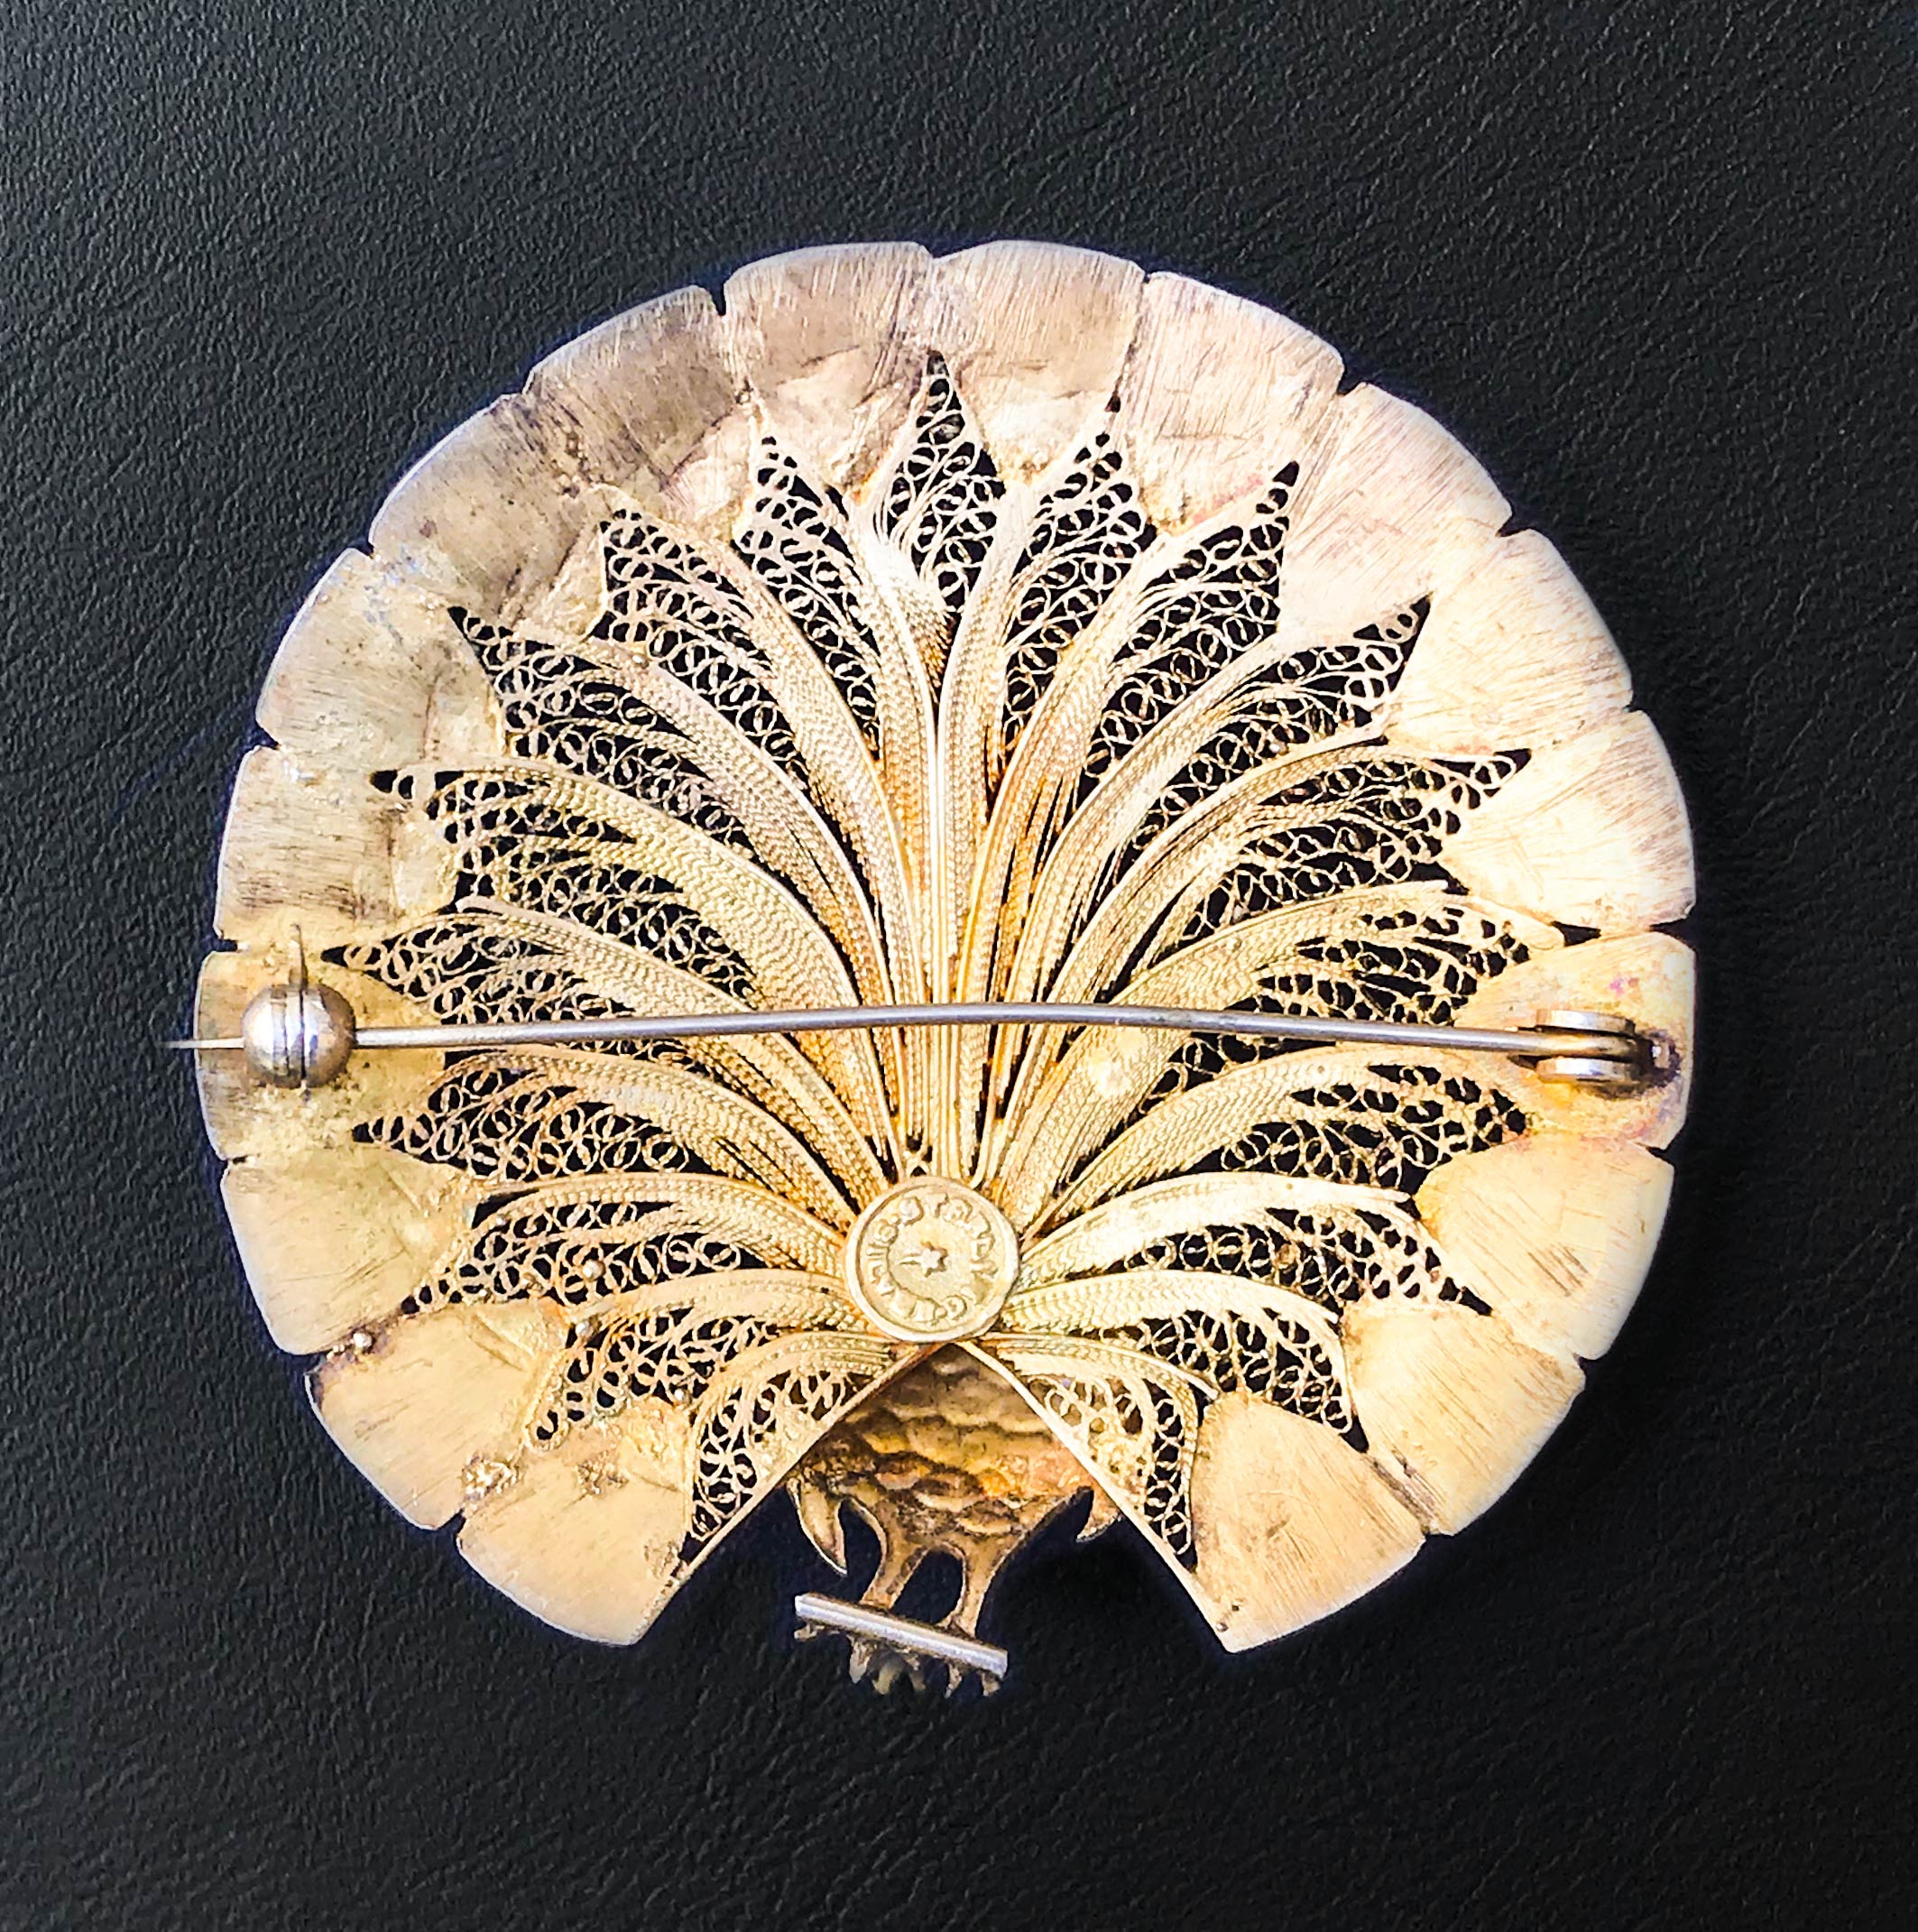 An excellent quality vintage brooch with delicate filigree detail finished in gilded silver with bright enamelled details on the peacock's body and at the end of his plumage - SHOP NOW - www.intovintage.co.uk